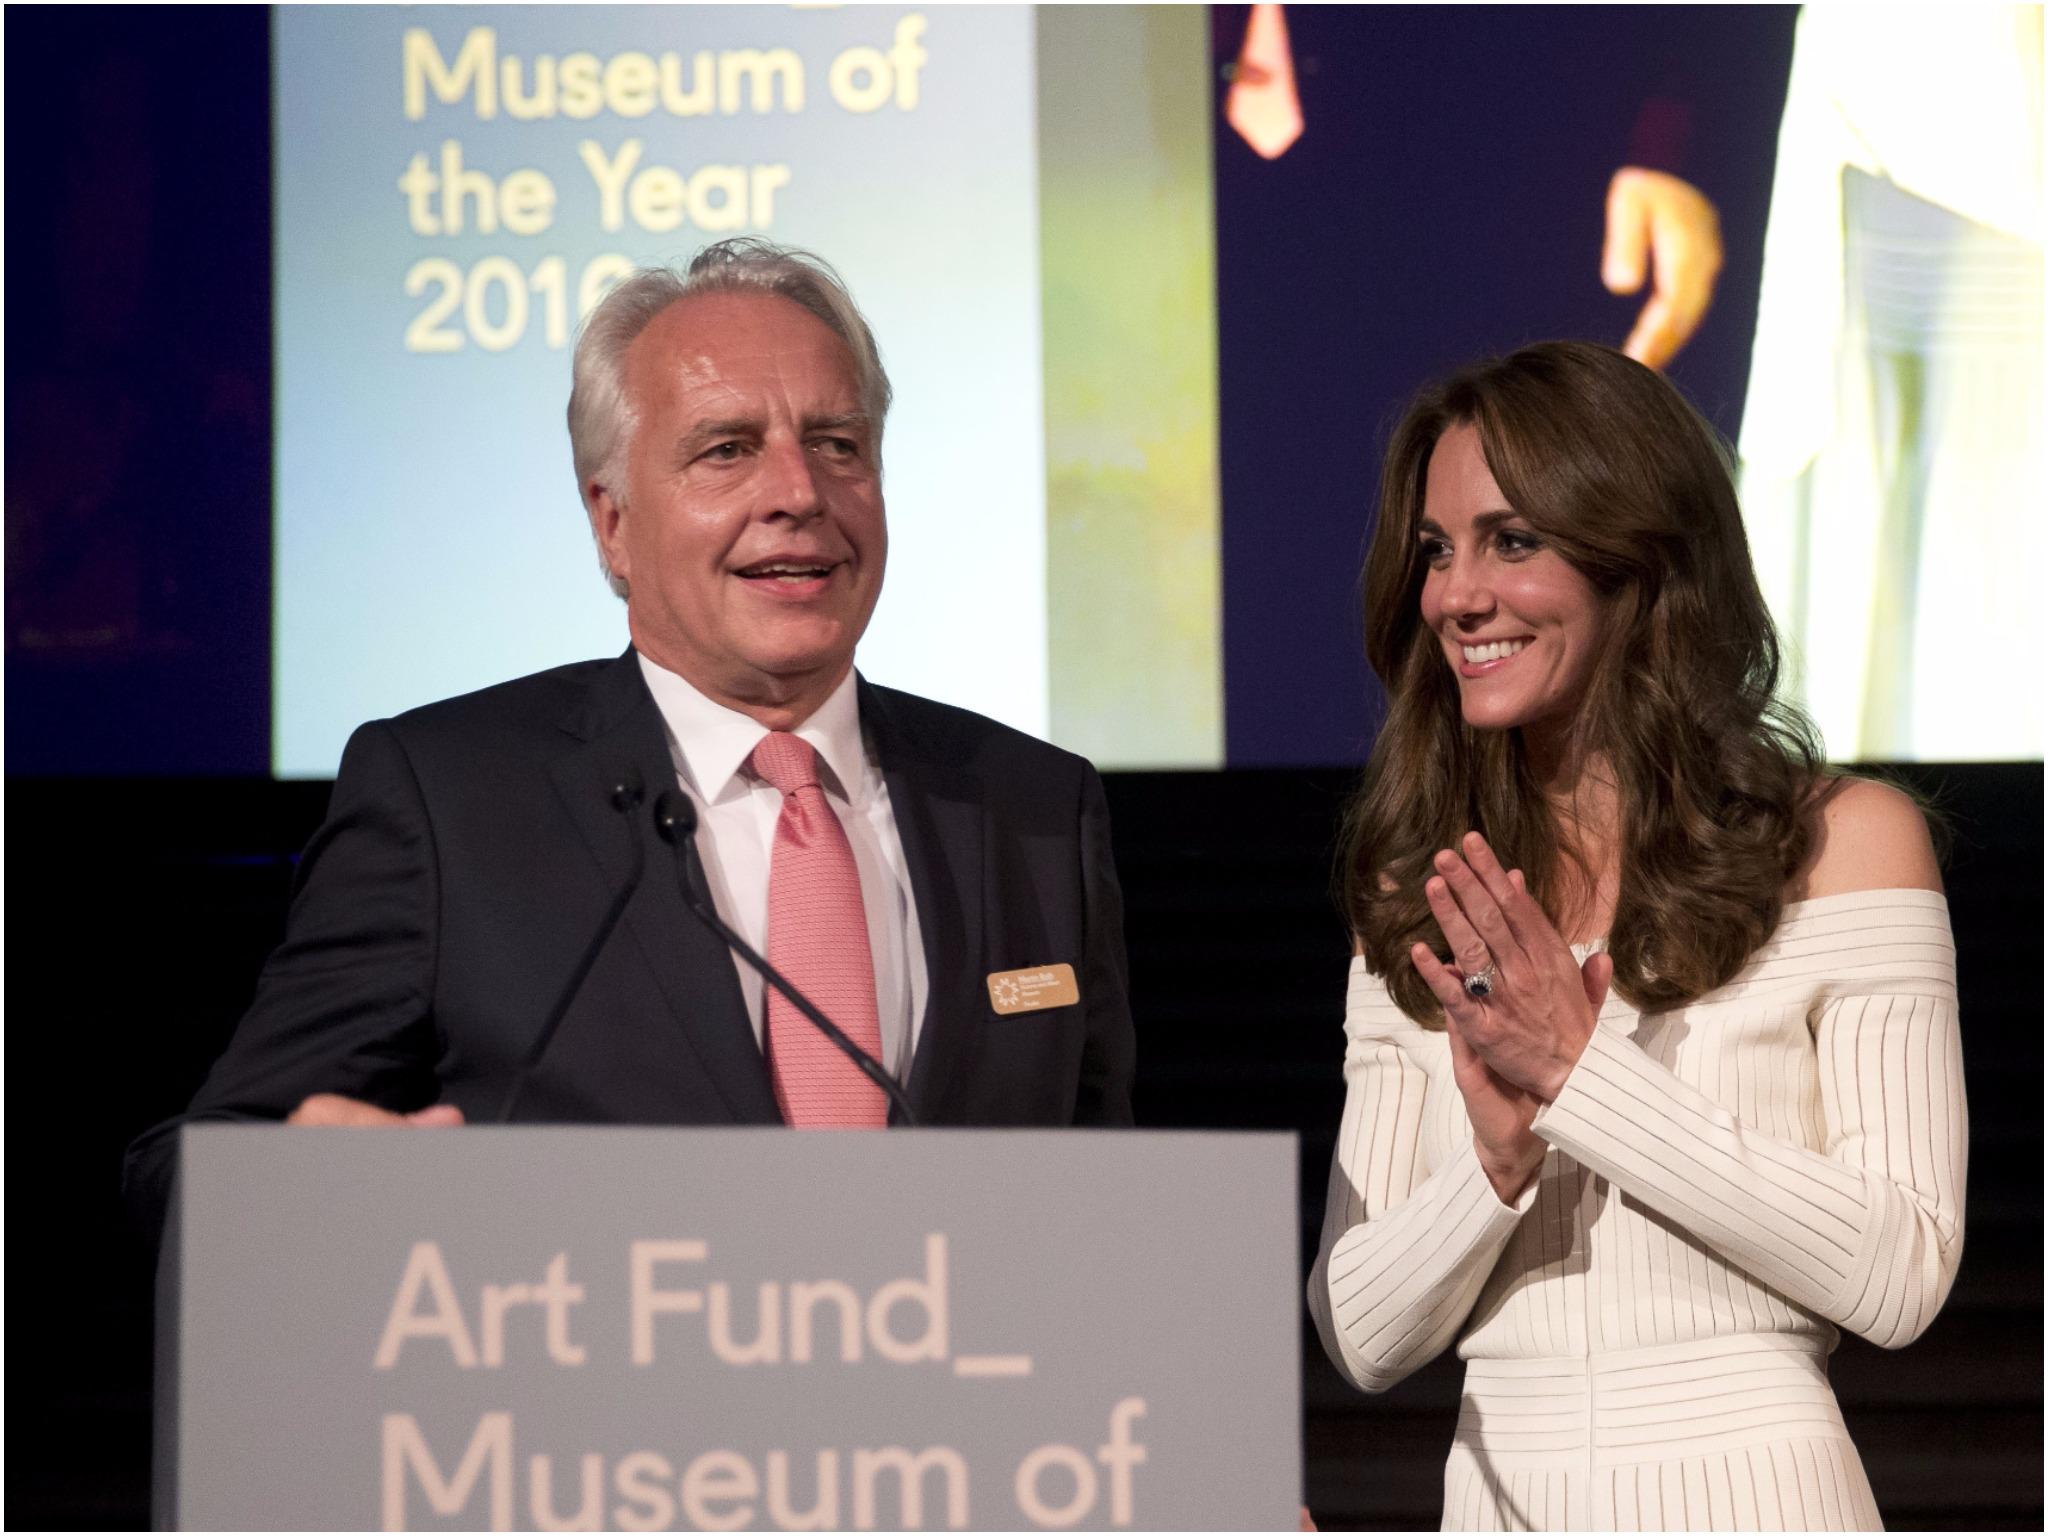 Martin Roth and Kate Middleton at the Museum of the Year Awards